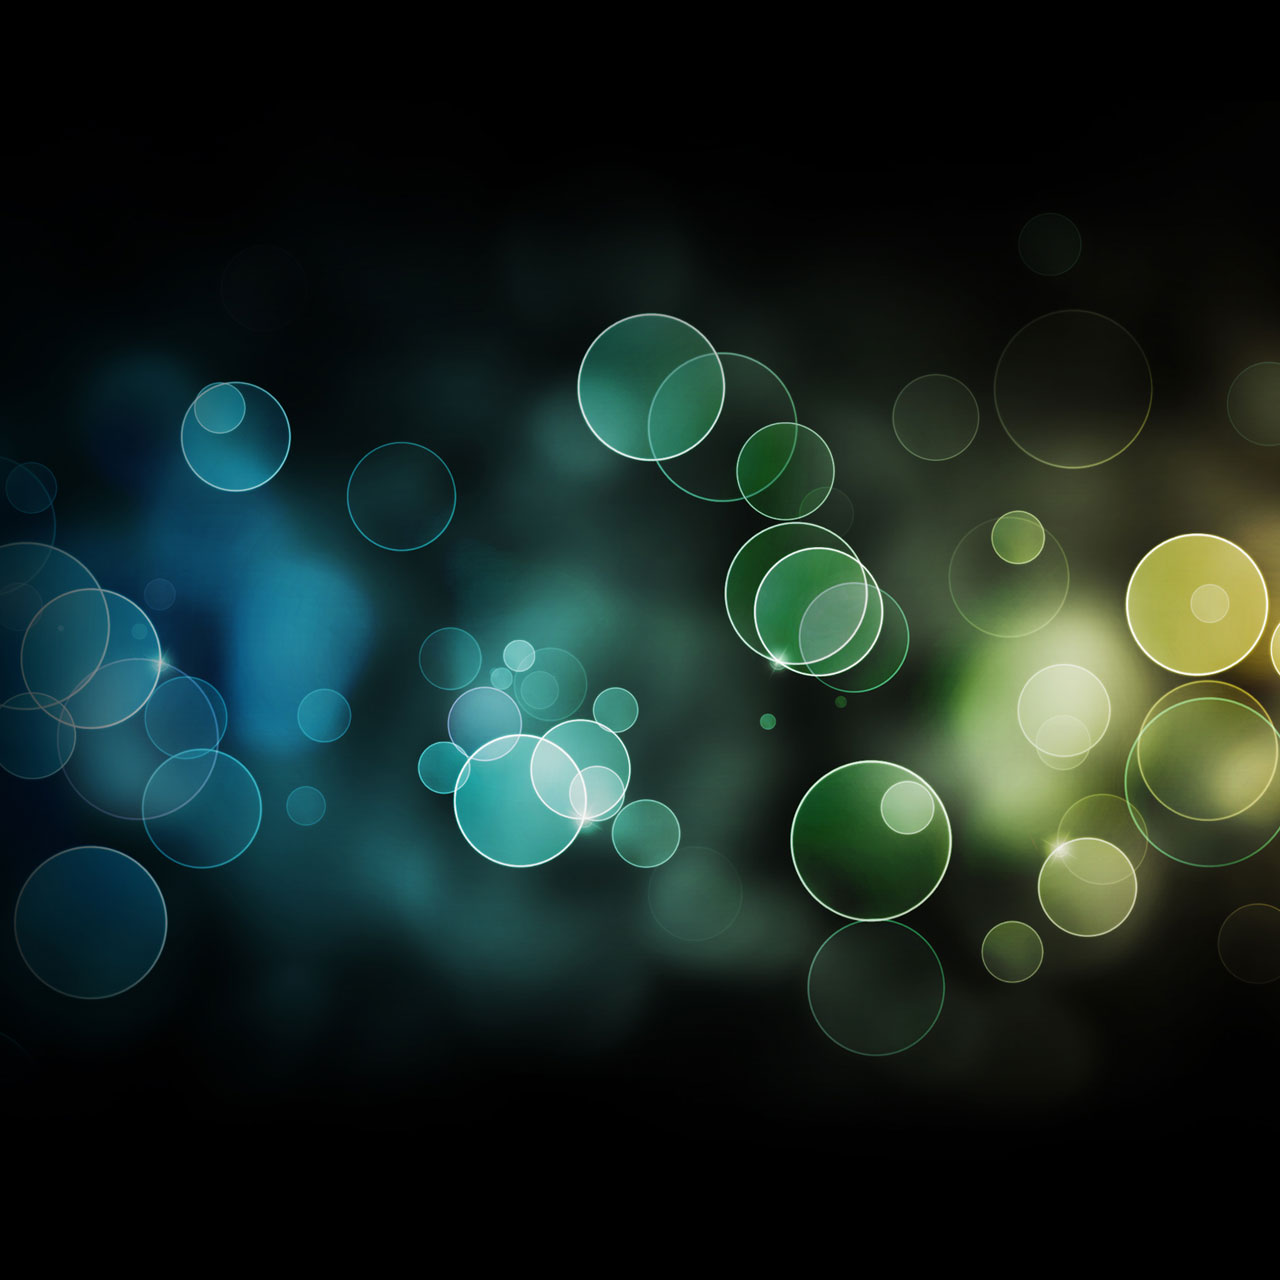 Abstract Bubbles Samsung Galaxy Tab 10 wallpapers Tablet